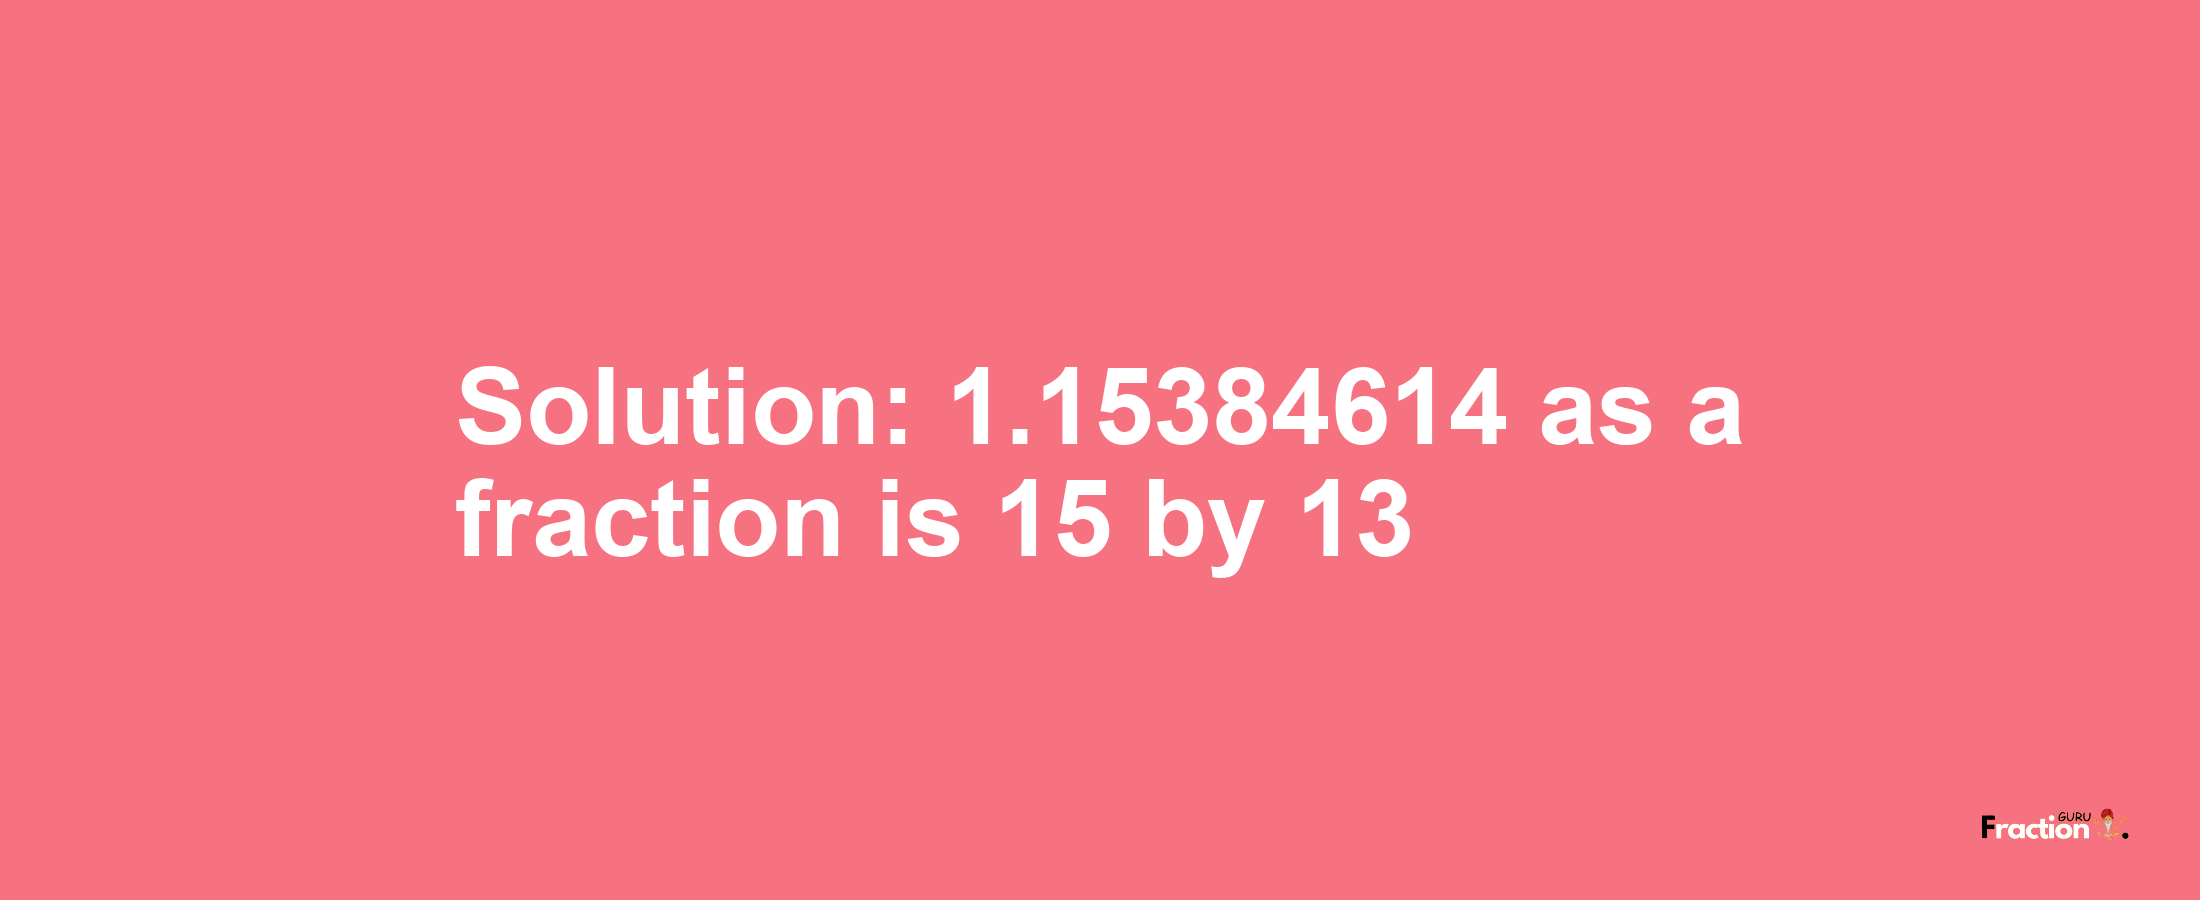 Solution:1.15384614 as a fraction is 15/13